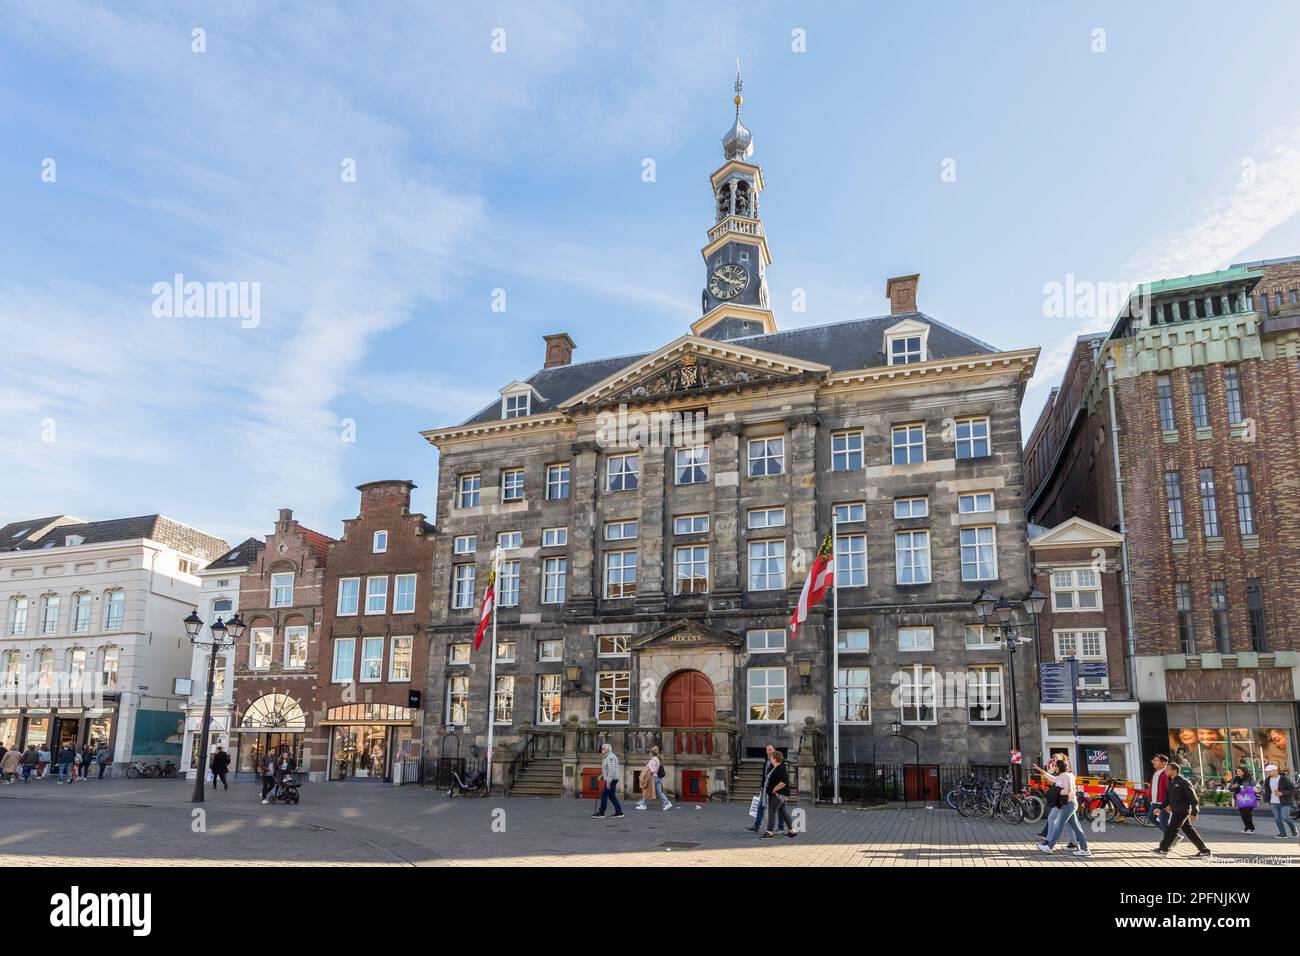 14 century town hall of the city of Den Bosch. Stock Photo